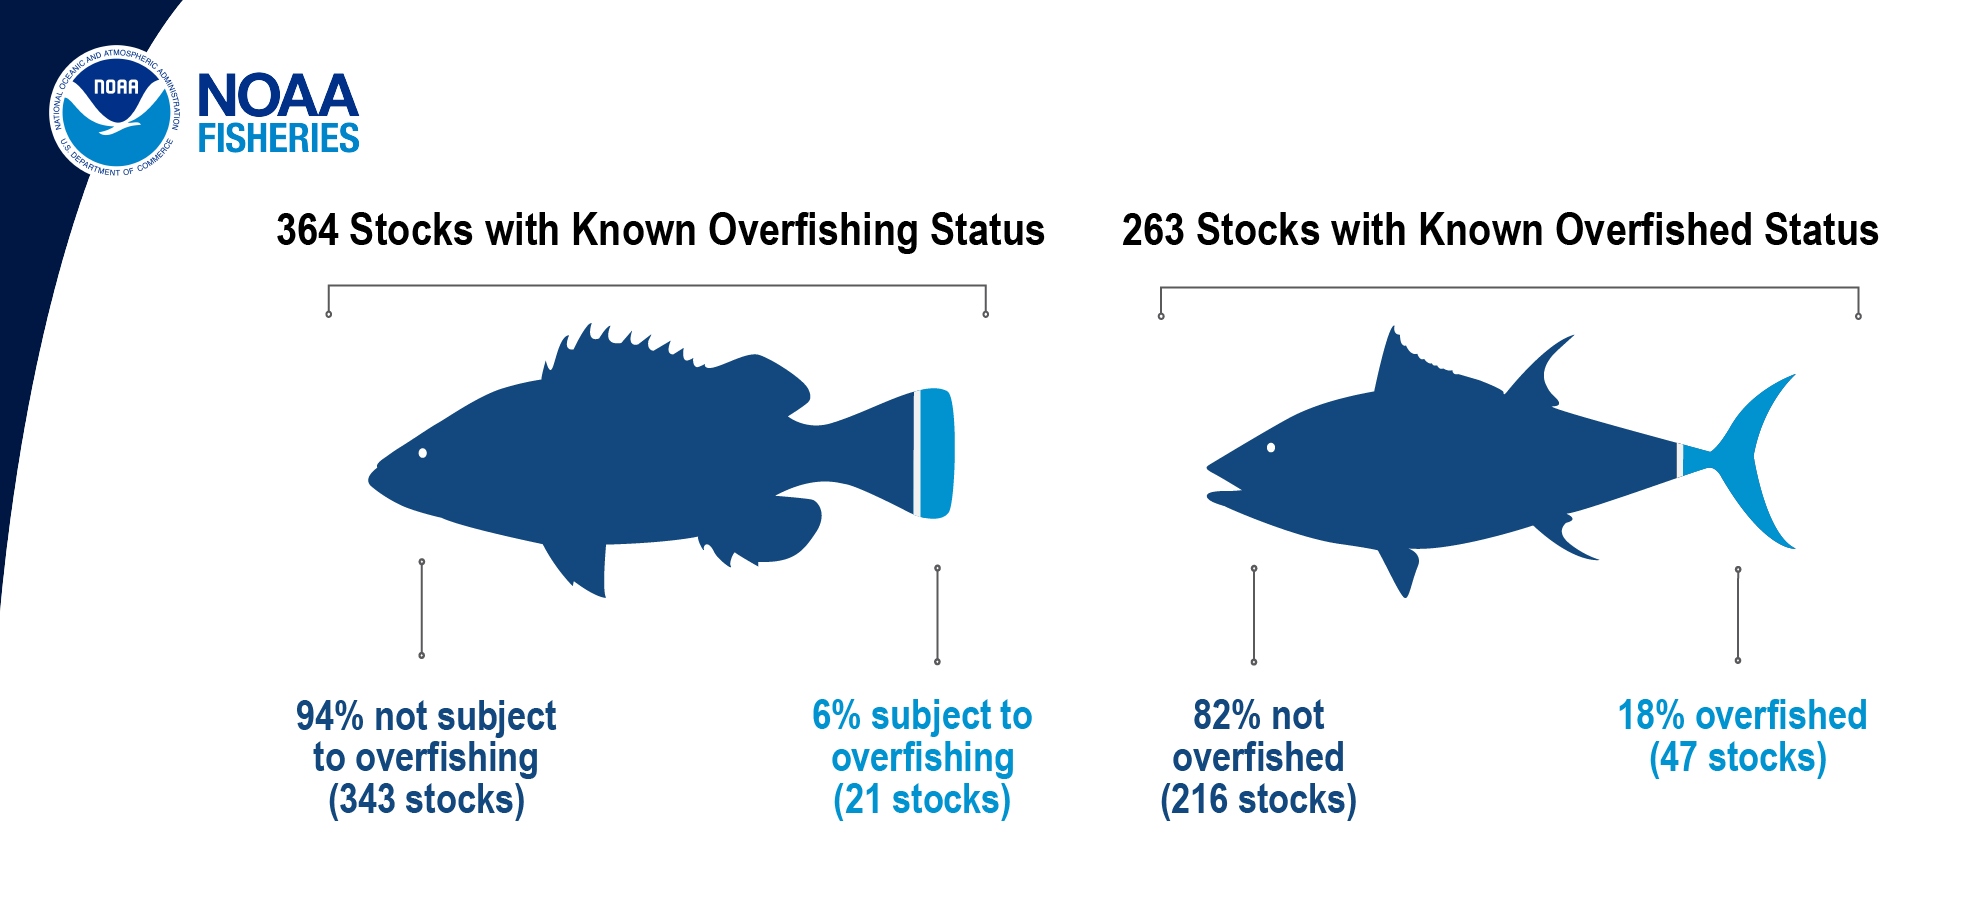 Image showing that of the more than 506 stocks and stock complexes managed by NOAA, 364 have a known overfishing status (343 not subject to overfishing and 21 subject to overfishing) and 263 have a known overfished status (216 not overfished and 47 overfished).